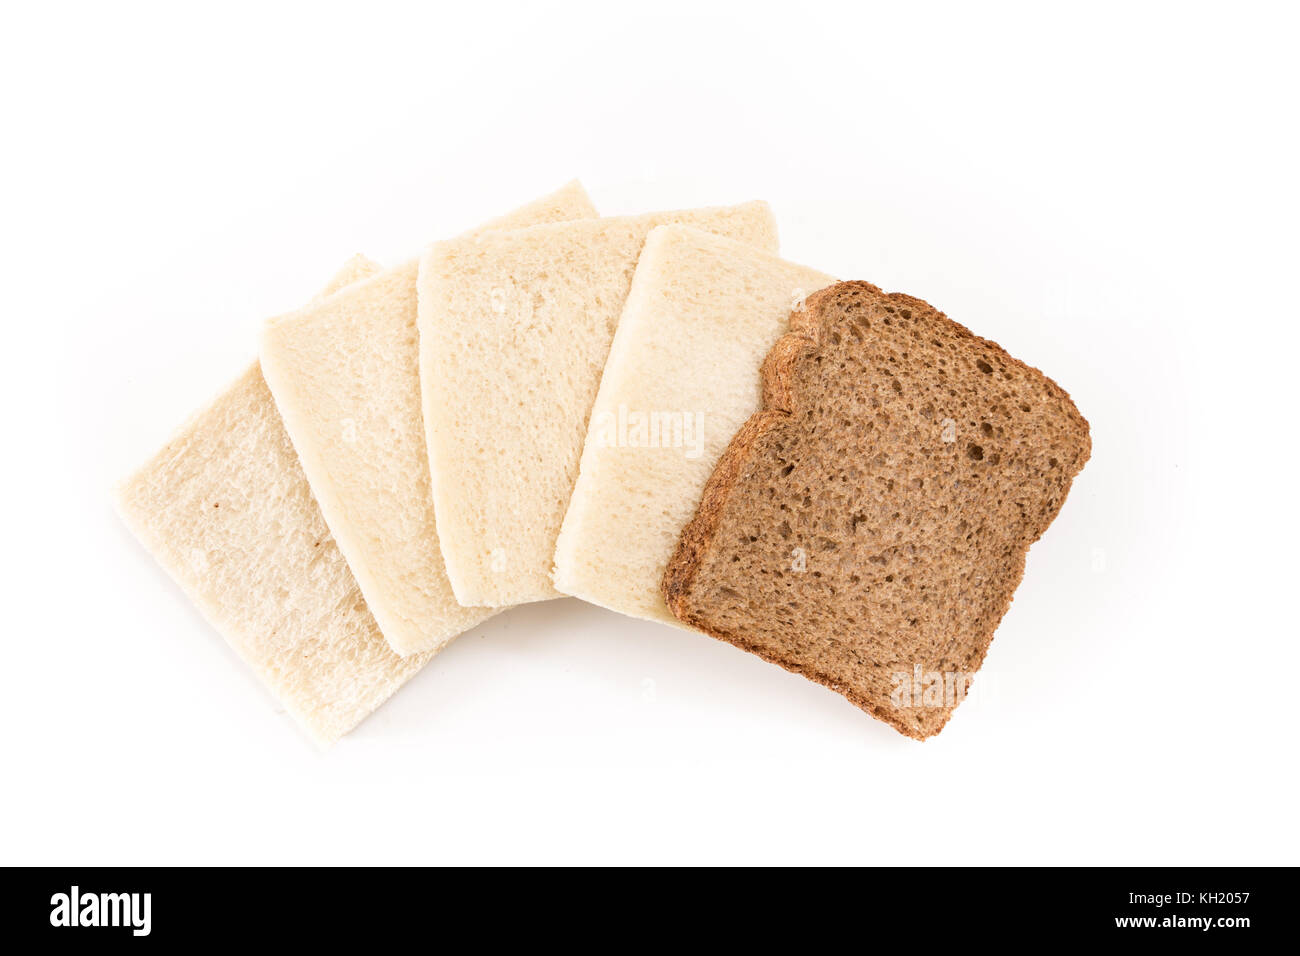 White no crust sandwich bread slices with one of them wholesome brown, on white background. Stock Photo